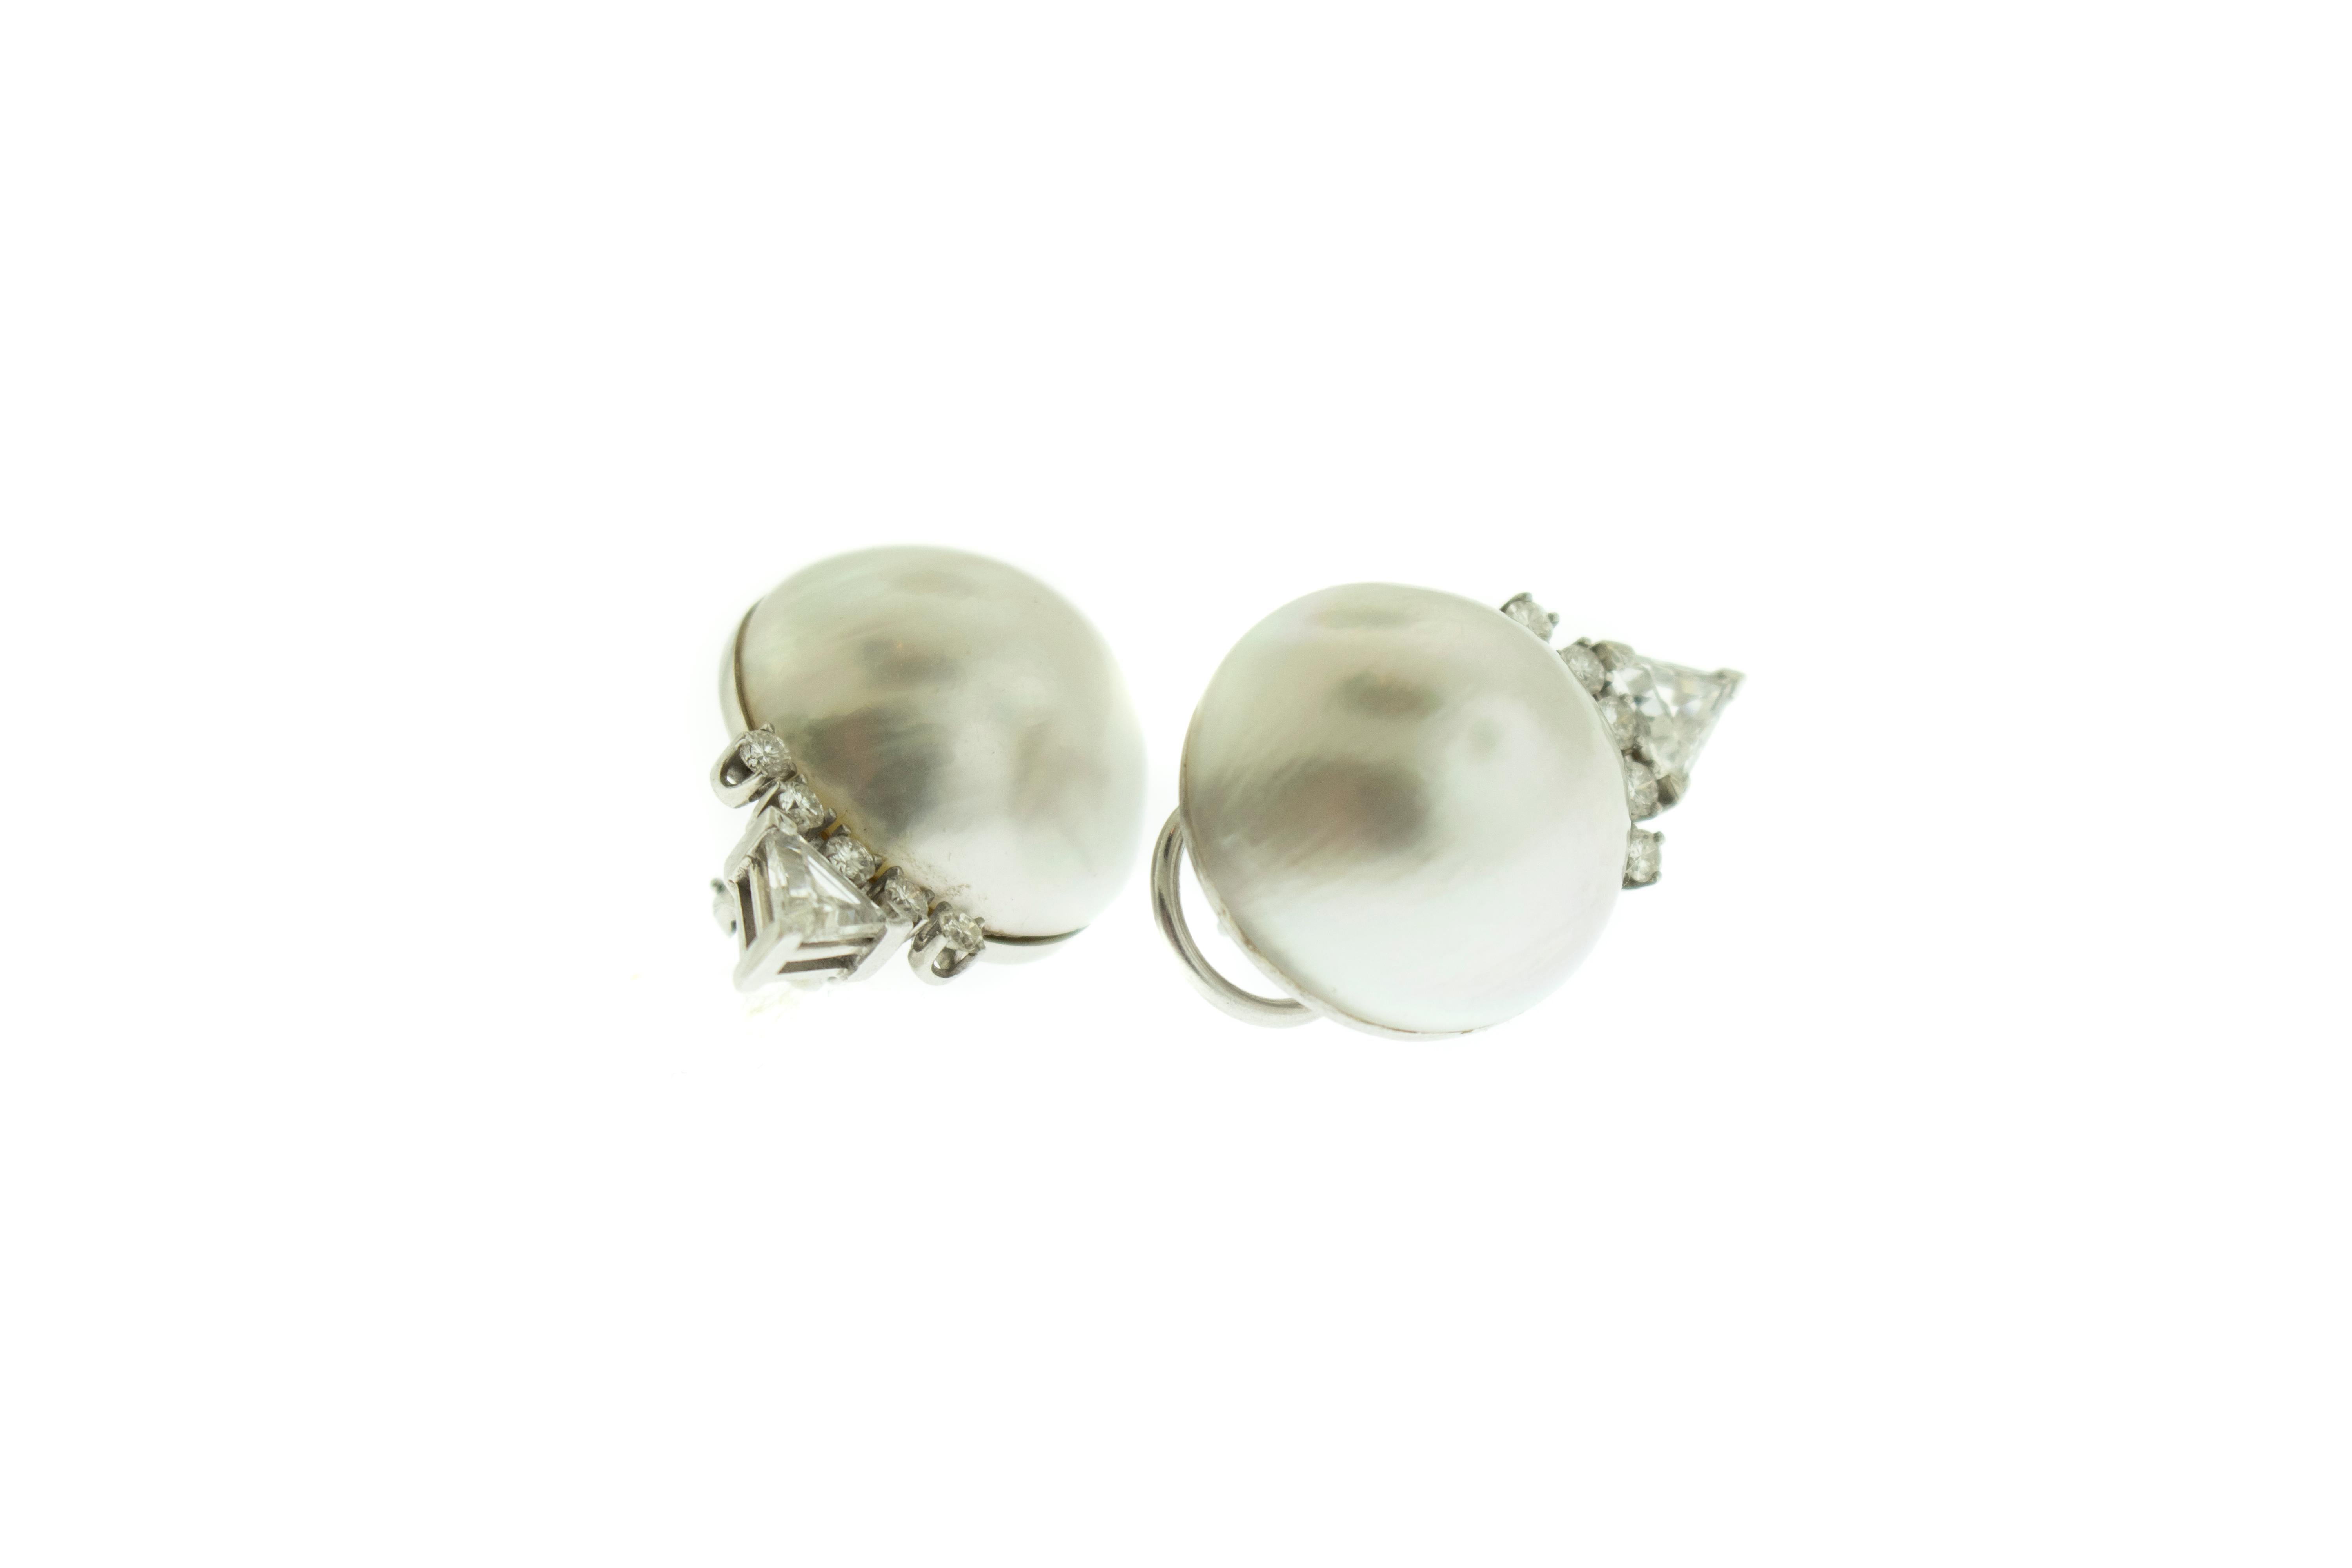 Pearl Diamond 14k White Gold Earrings. Half Pearls are decorated with five round diamonds and one larger triangle diamond on top. Earrings have spring back cover for safety while wearing. Total weight 14.76 grams